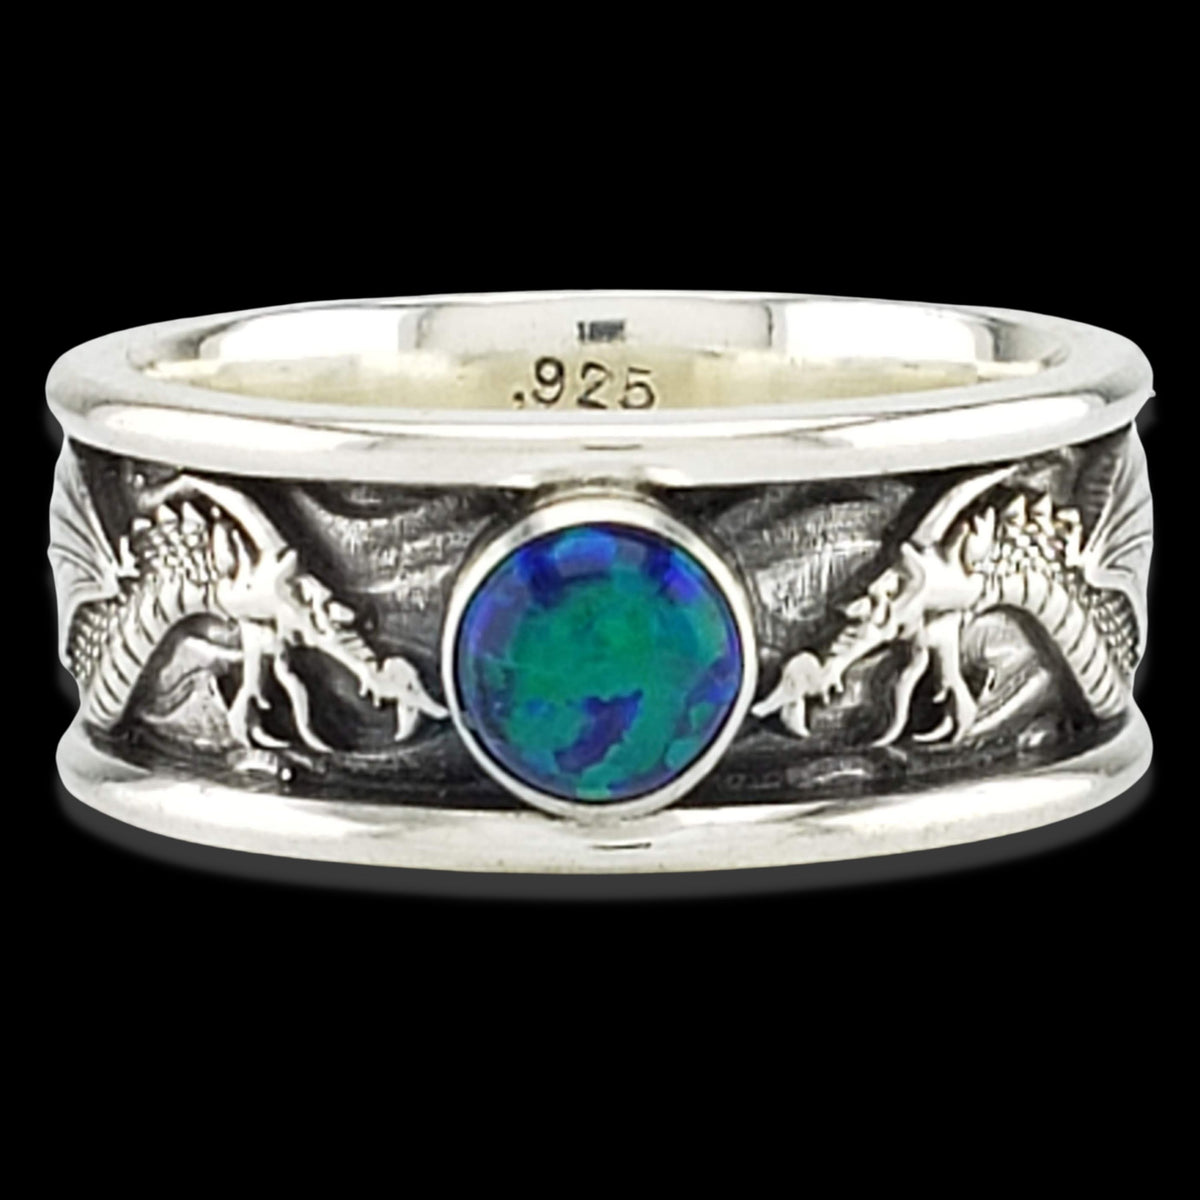 DRACO THE DRAGON SOLITAIRE Band Ring in GOLD with CHOICE OF 5mm GEMSTONE - Starting at $1049